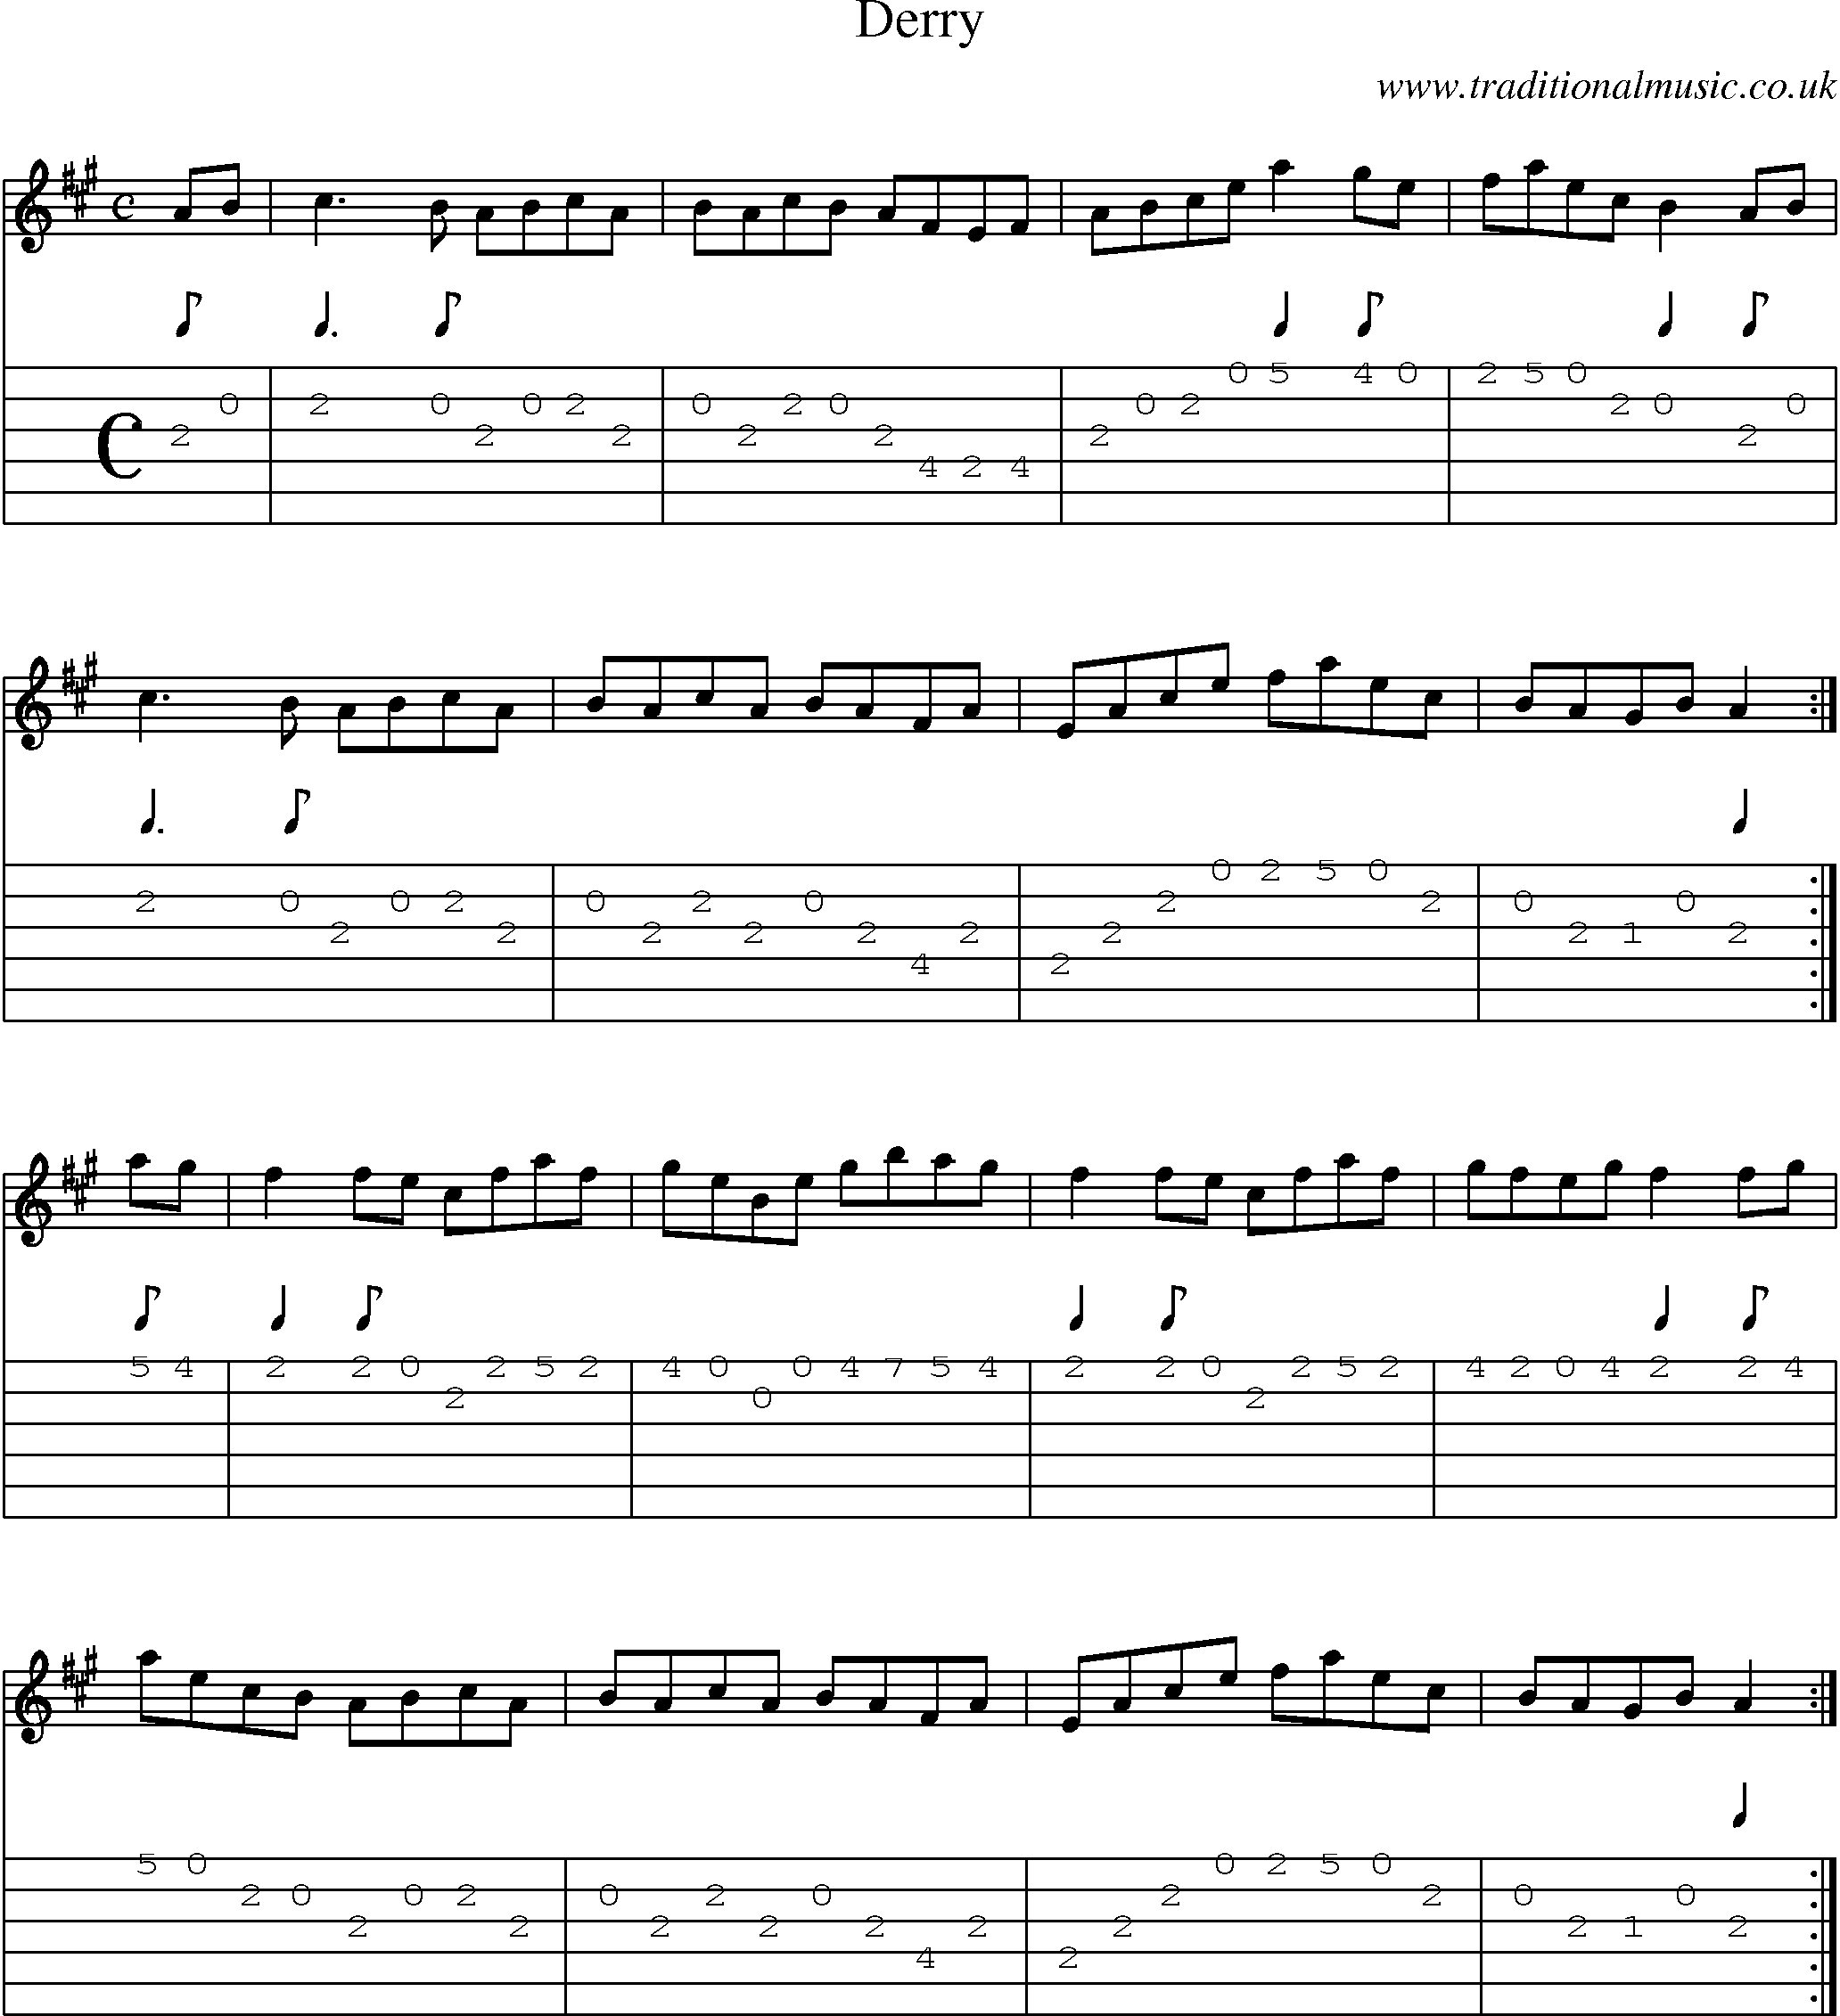 Music Score and Guitar Tabs for Derry